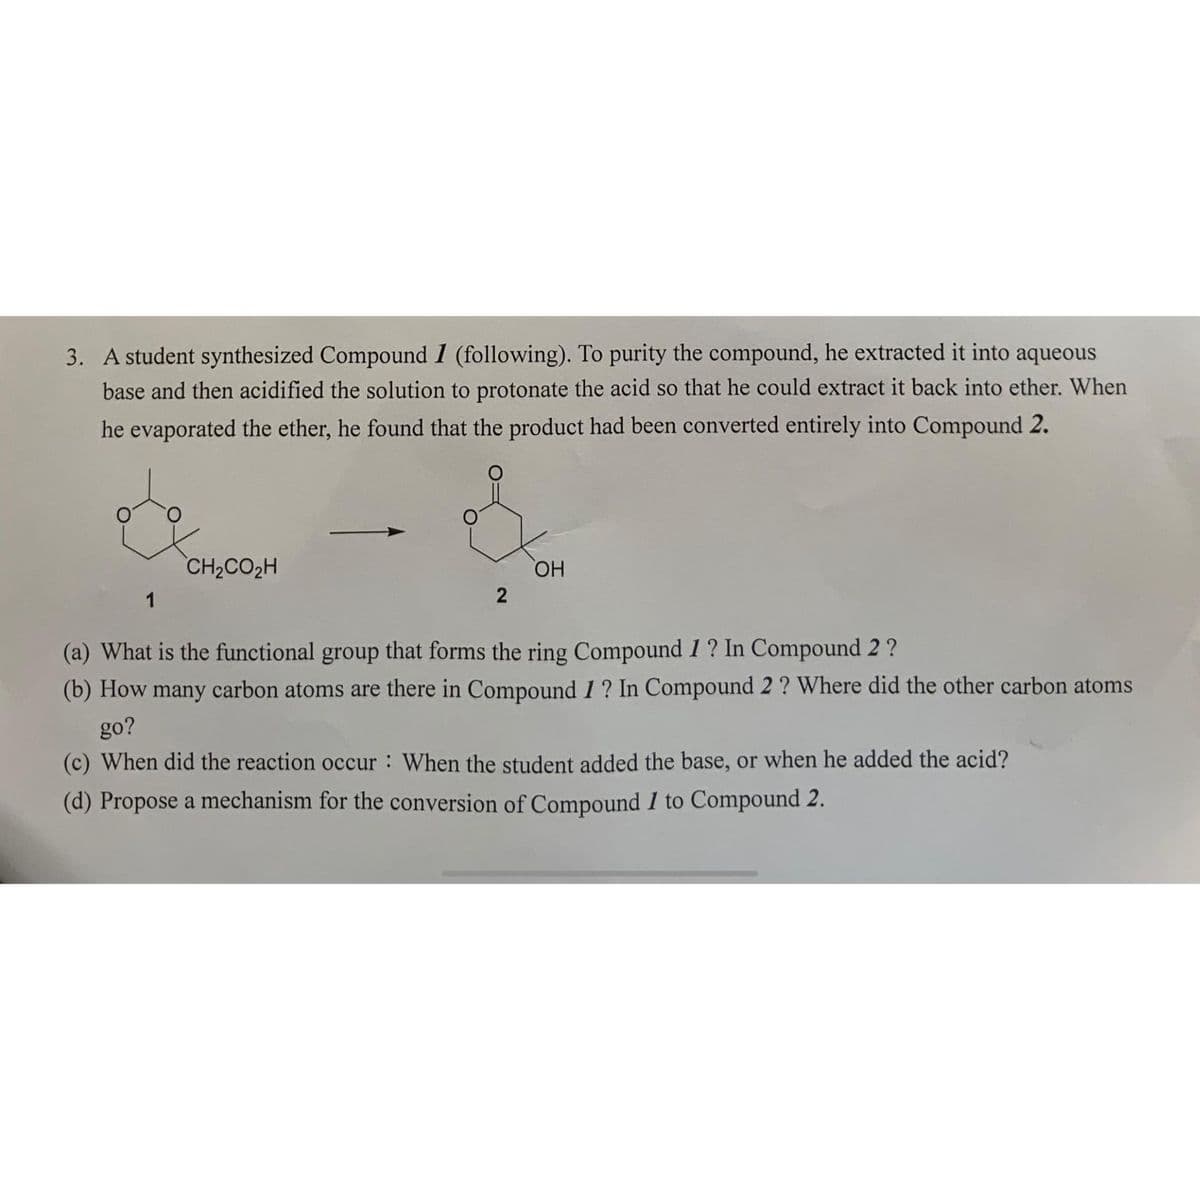 3. A student synthesized Compound 1 (following). To purity the compound, he extracted it into aqueous
base and then acidified the solution to protonate the acid so that he could extract it back into ether. When
he evaporated the ether, he found that the product had been converted entirely into Compound 2.
1
CH2CO2H
2
OH
(a) What is the functional group that forms the ring Compound 1? In Compound 2 ?
(b) How many carbon atoms are there in Compound 1? In Compound 2 ? Where did the other carbon atoms
go?
(c) When did the reaction occur: When the student added the base, or when he added the acid?
(d) Propose a mechanism for the conversion of Compound I to Compound 2.